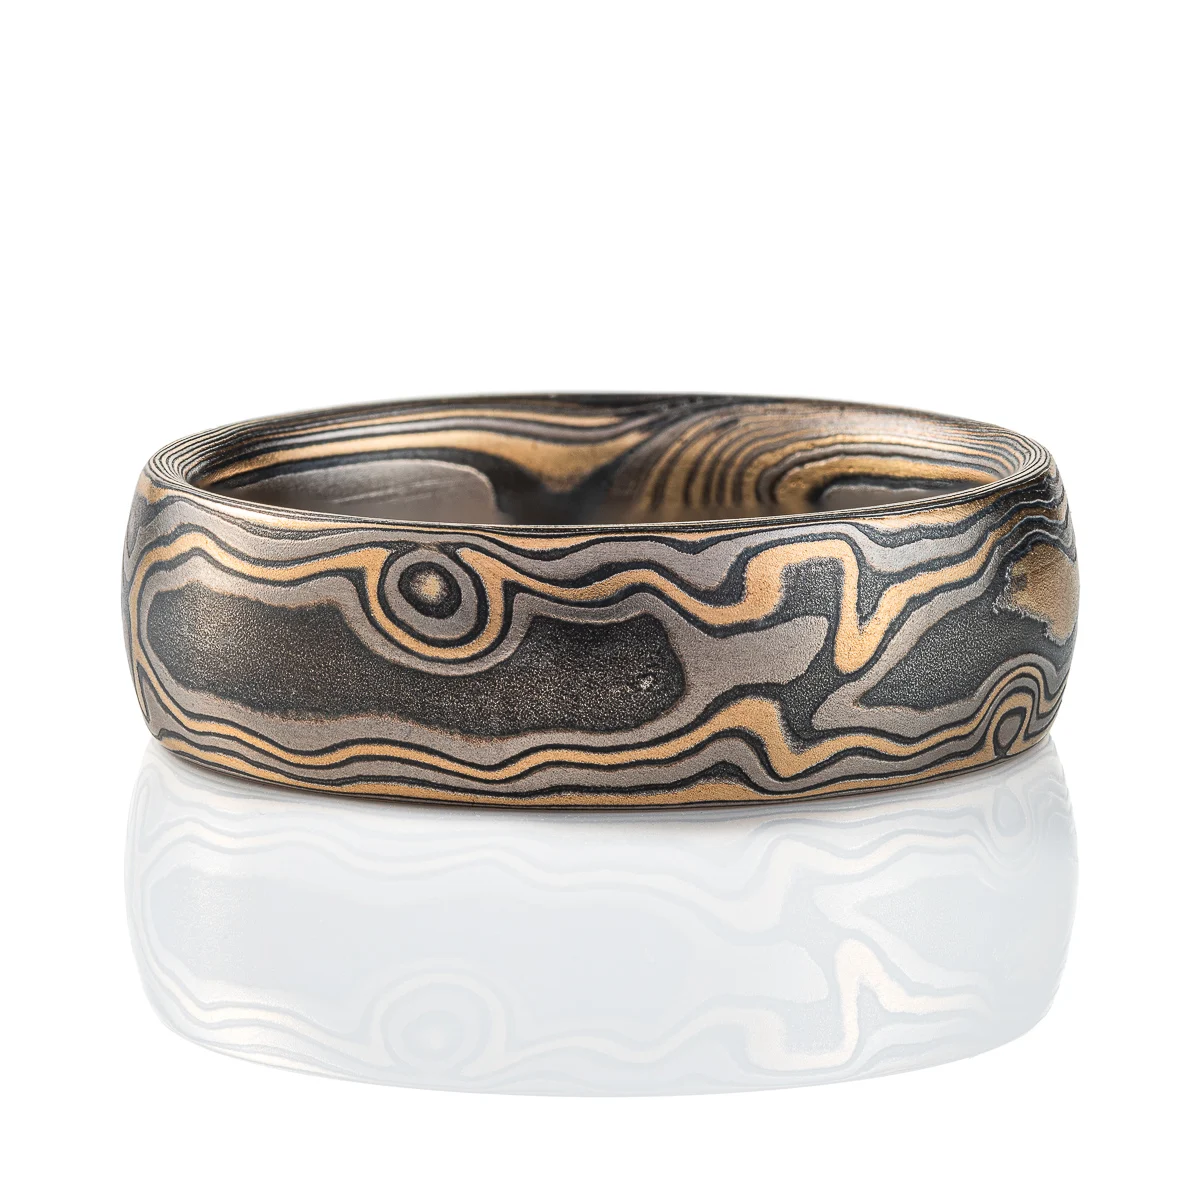 Gold and black mokume gane ring made in classic woodgrain pattern, metal colors used in the ring are yellow gold, palladium and oxidized silver (black in color). The ring has a low dome profile shape and slight texture from an etched finish.